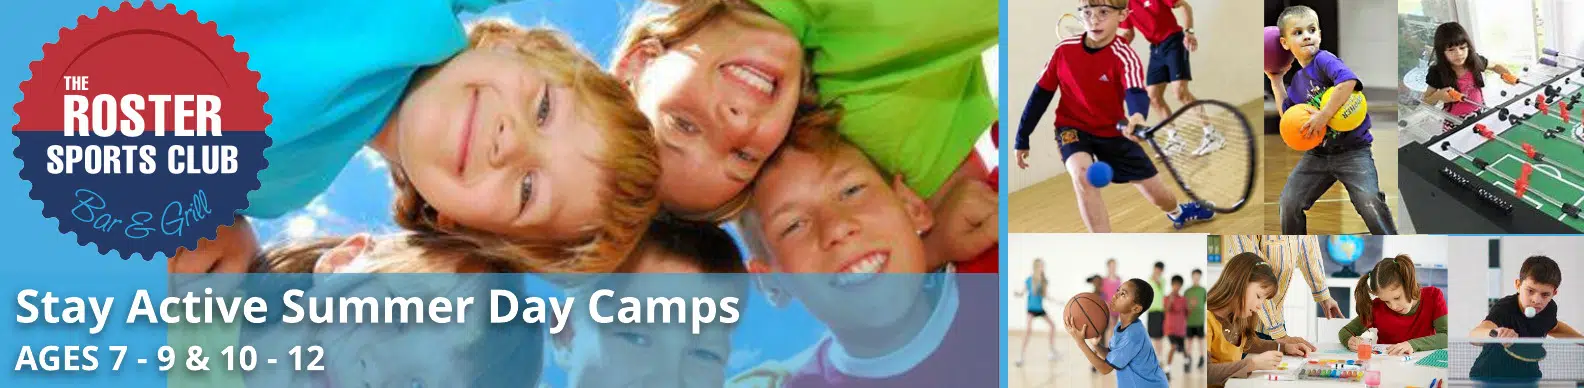 Summer Camps Email Header SportyHQ